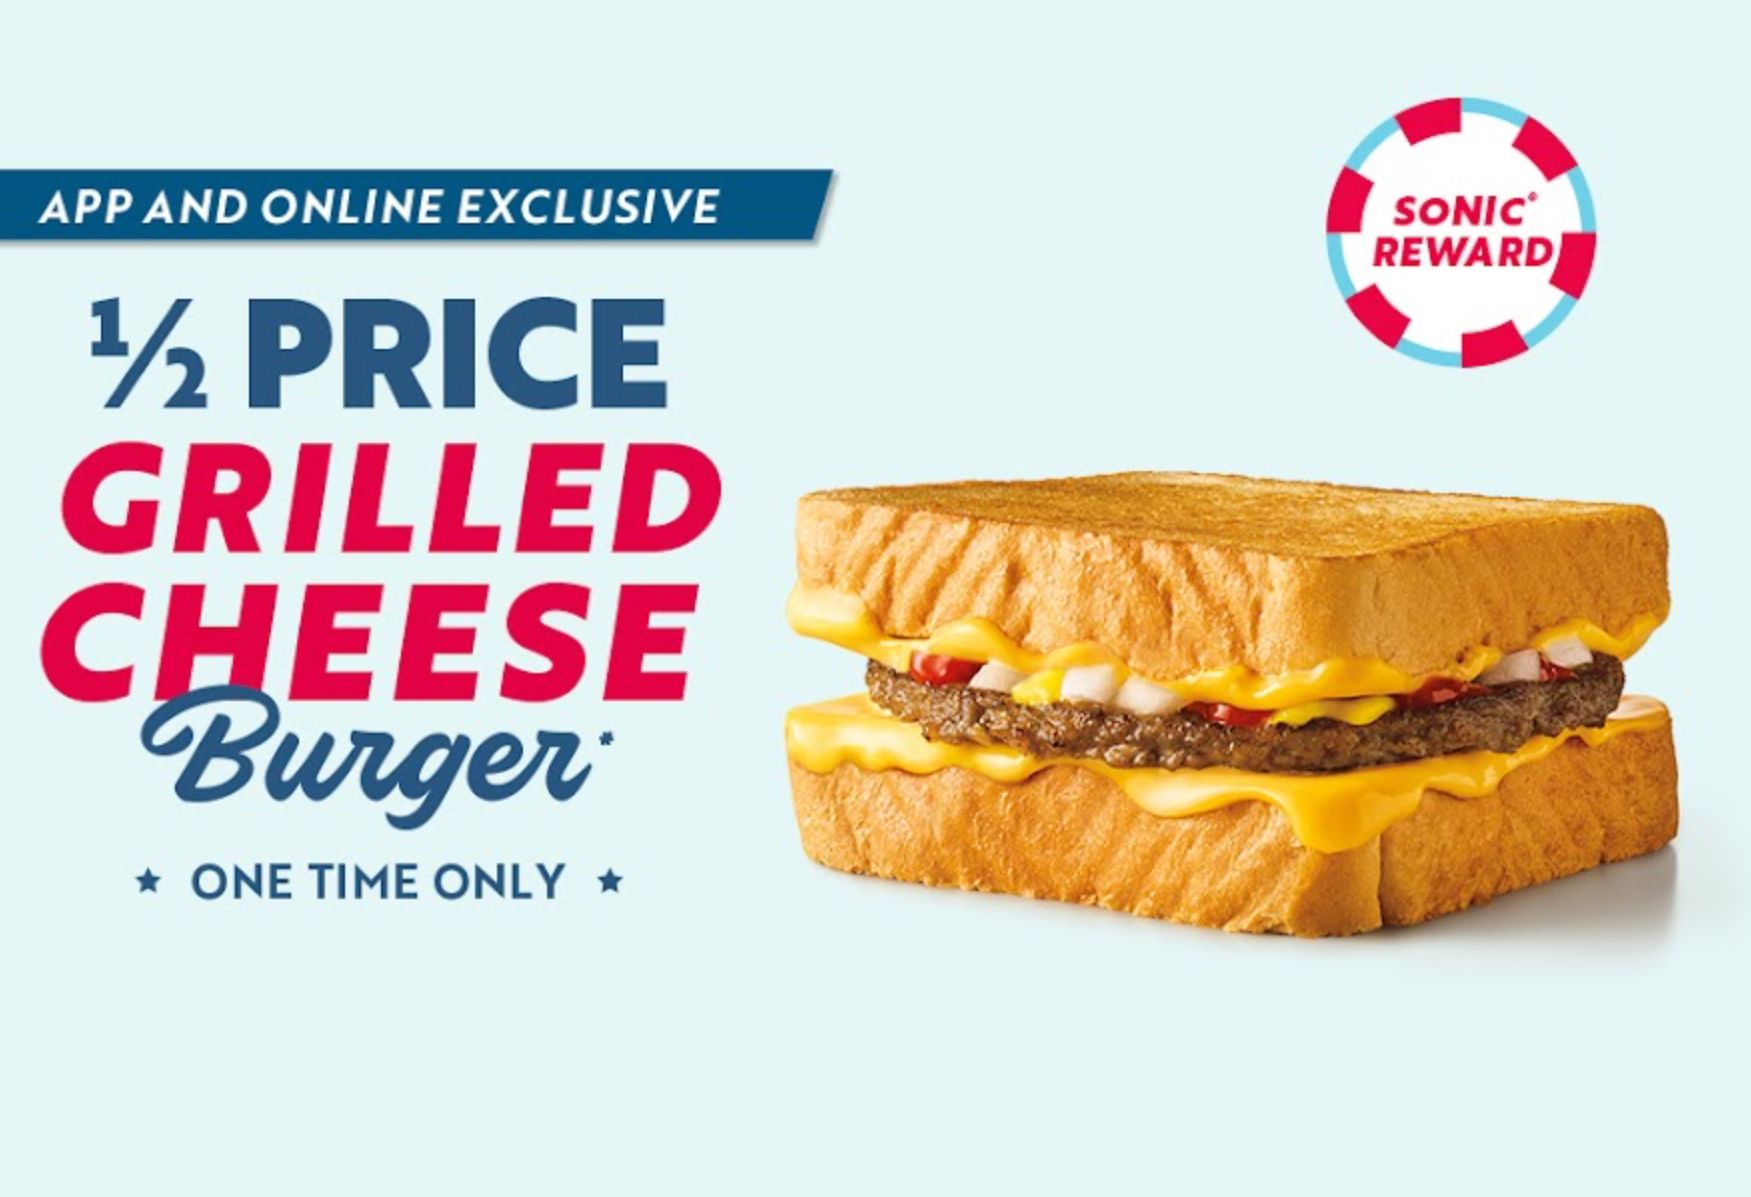 Sonic is Now Offering 50% Off the New Grilled Cheese Burger In-app or Online (One Time Only)